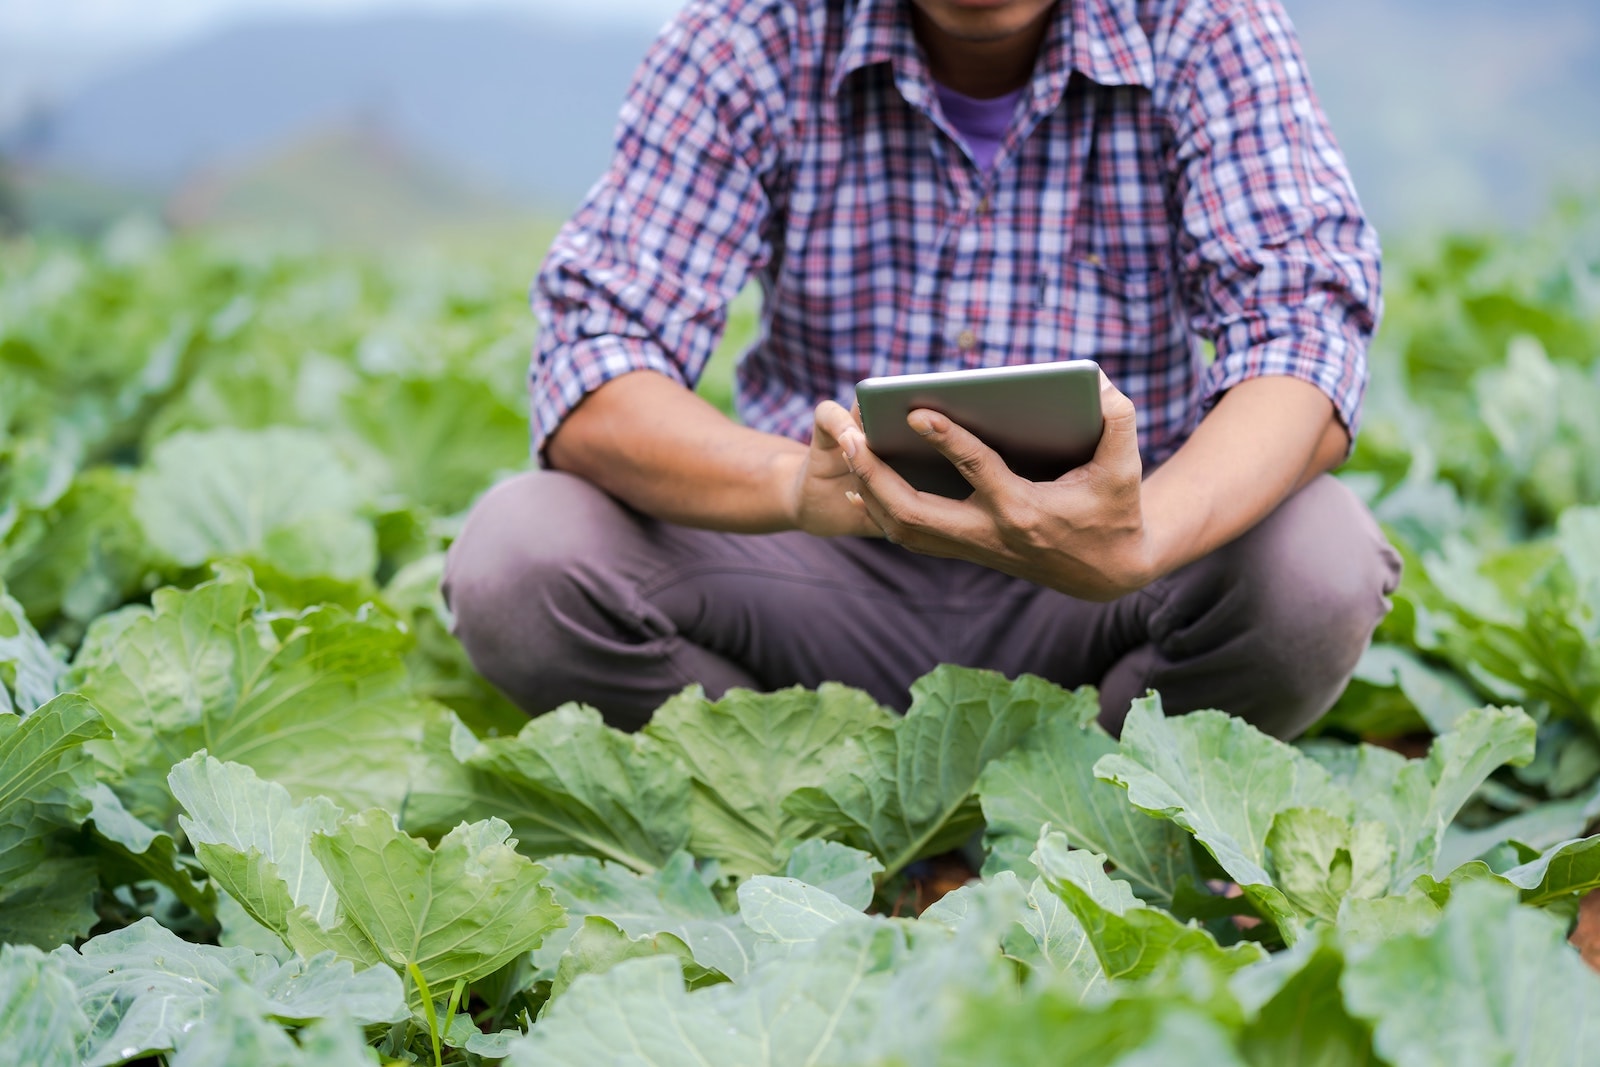 Sustainable food system through digital systems